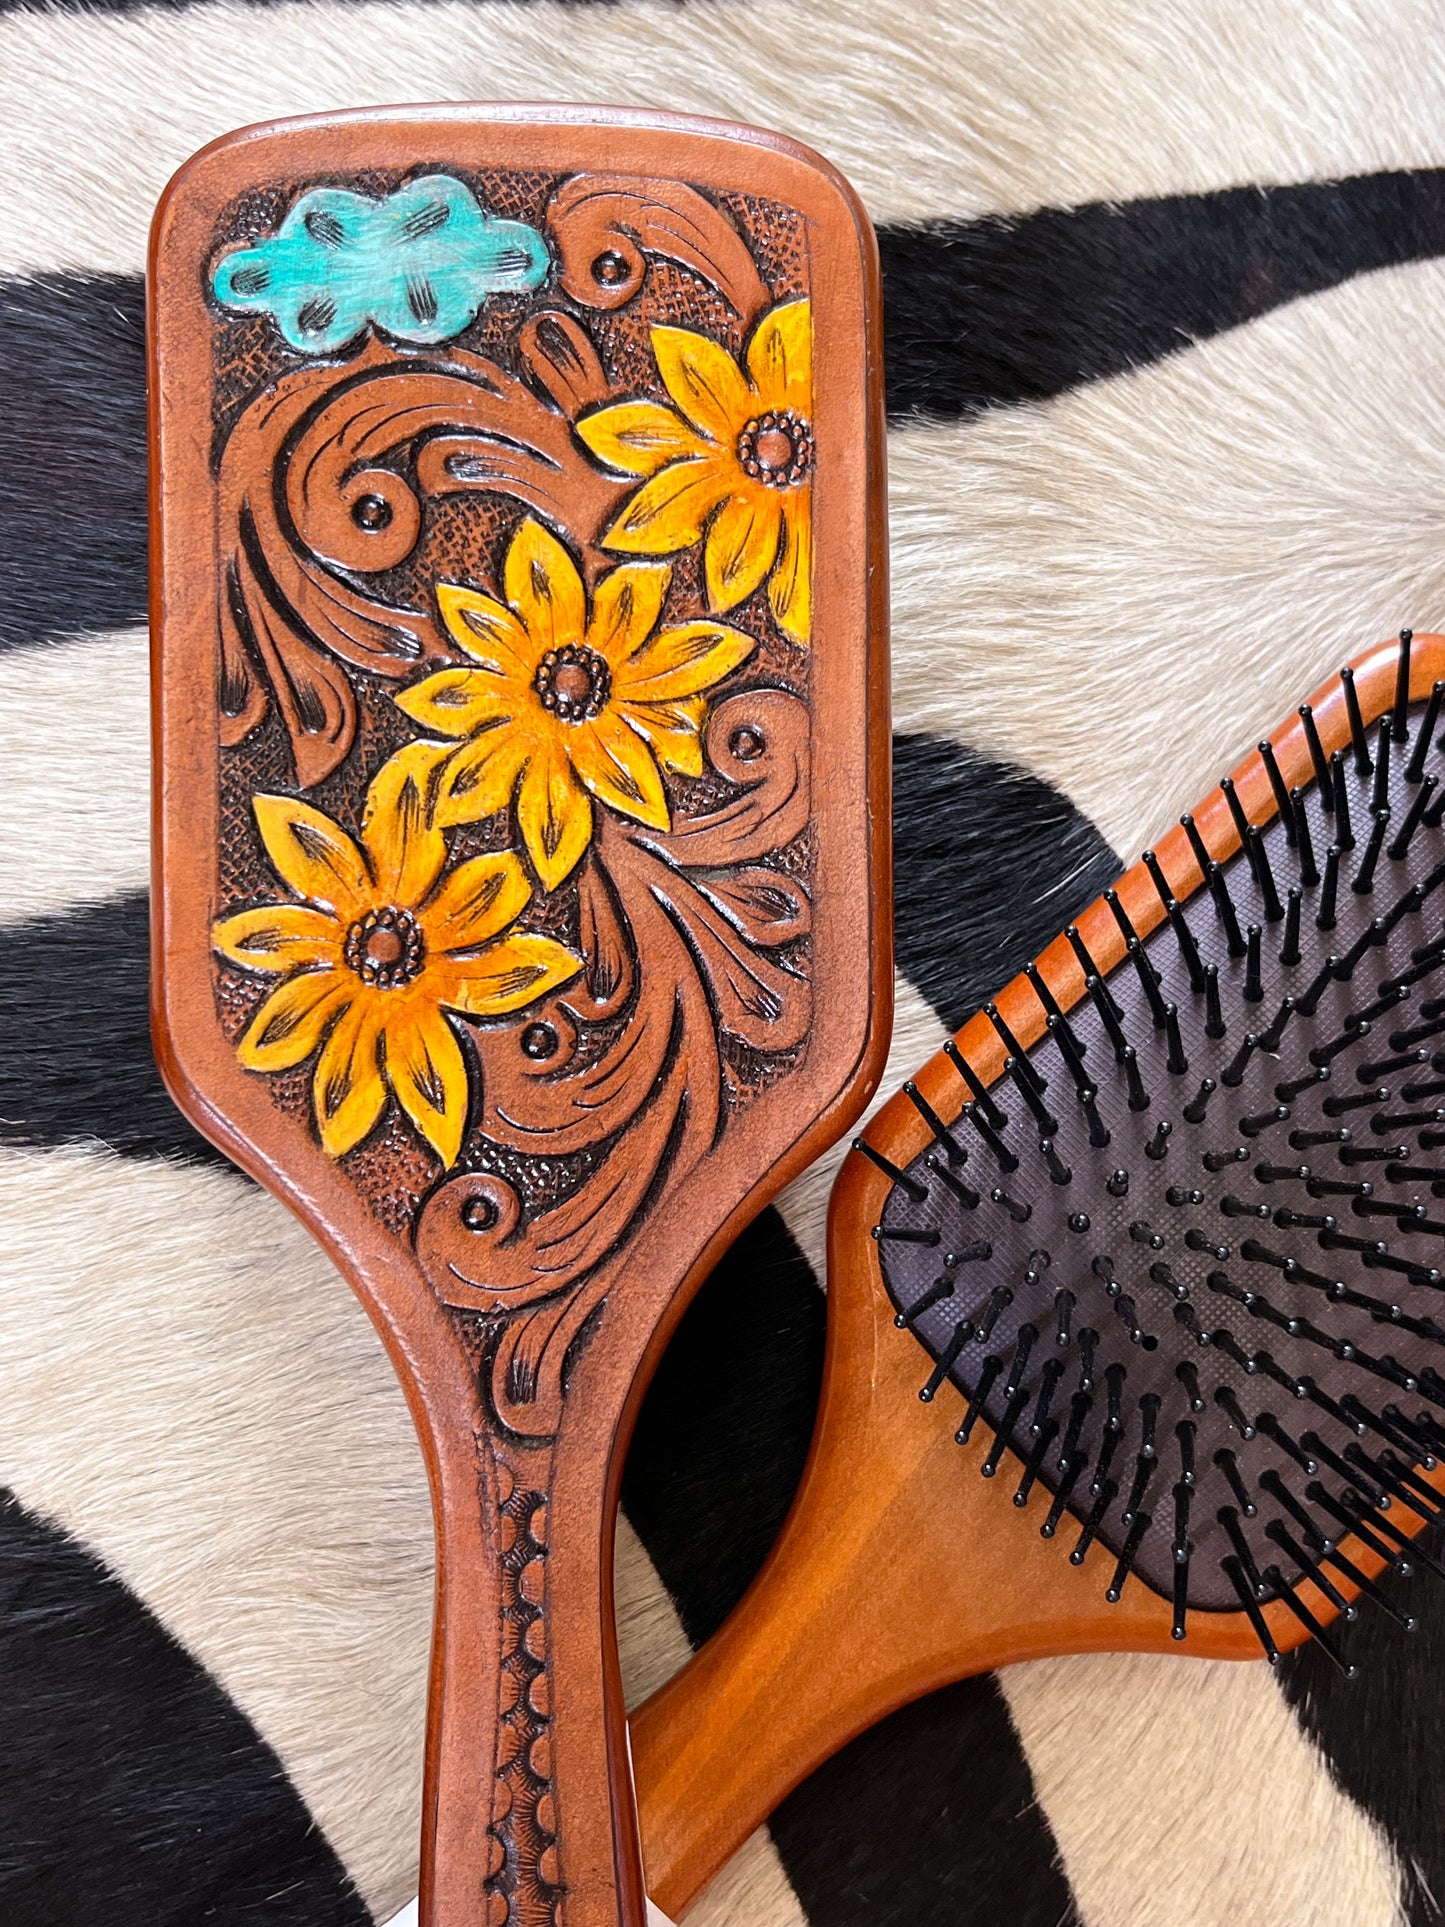 The Tooled Hair Brushes